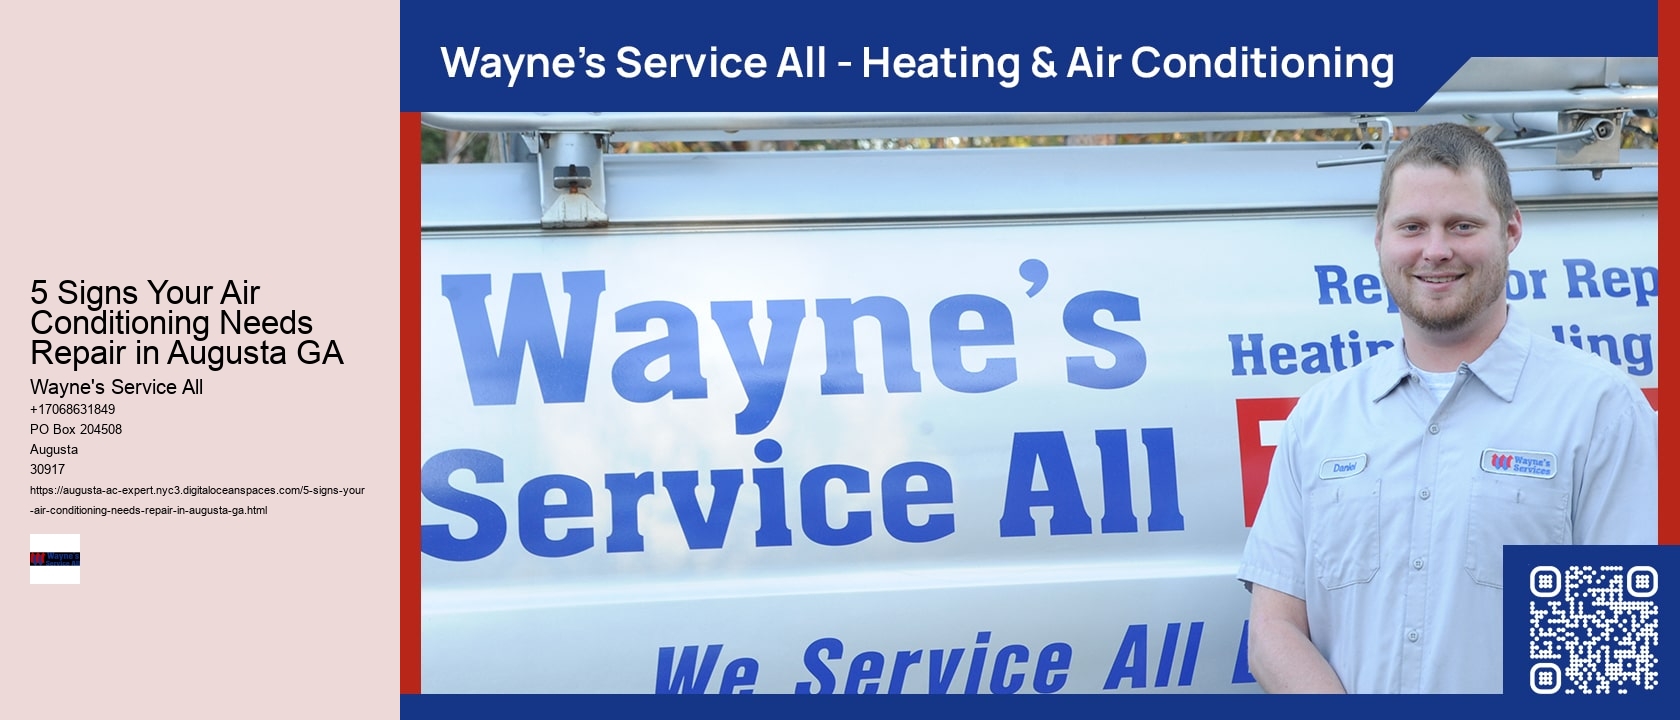 5 Signs Your Air Conditioning Needs Repair in Augusta GA